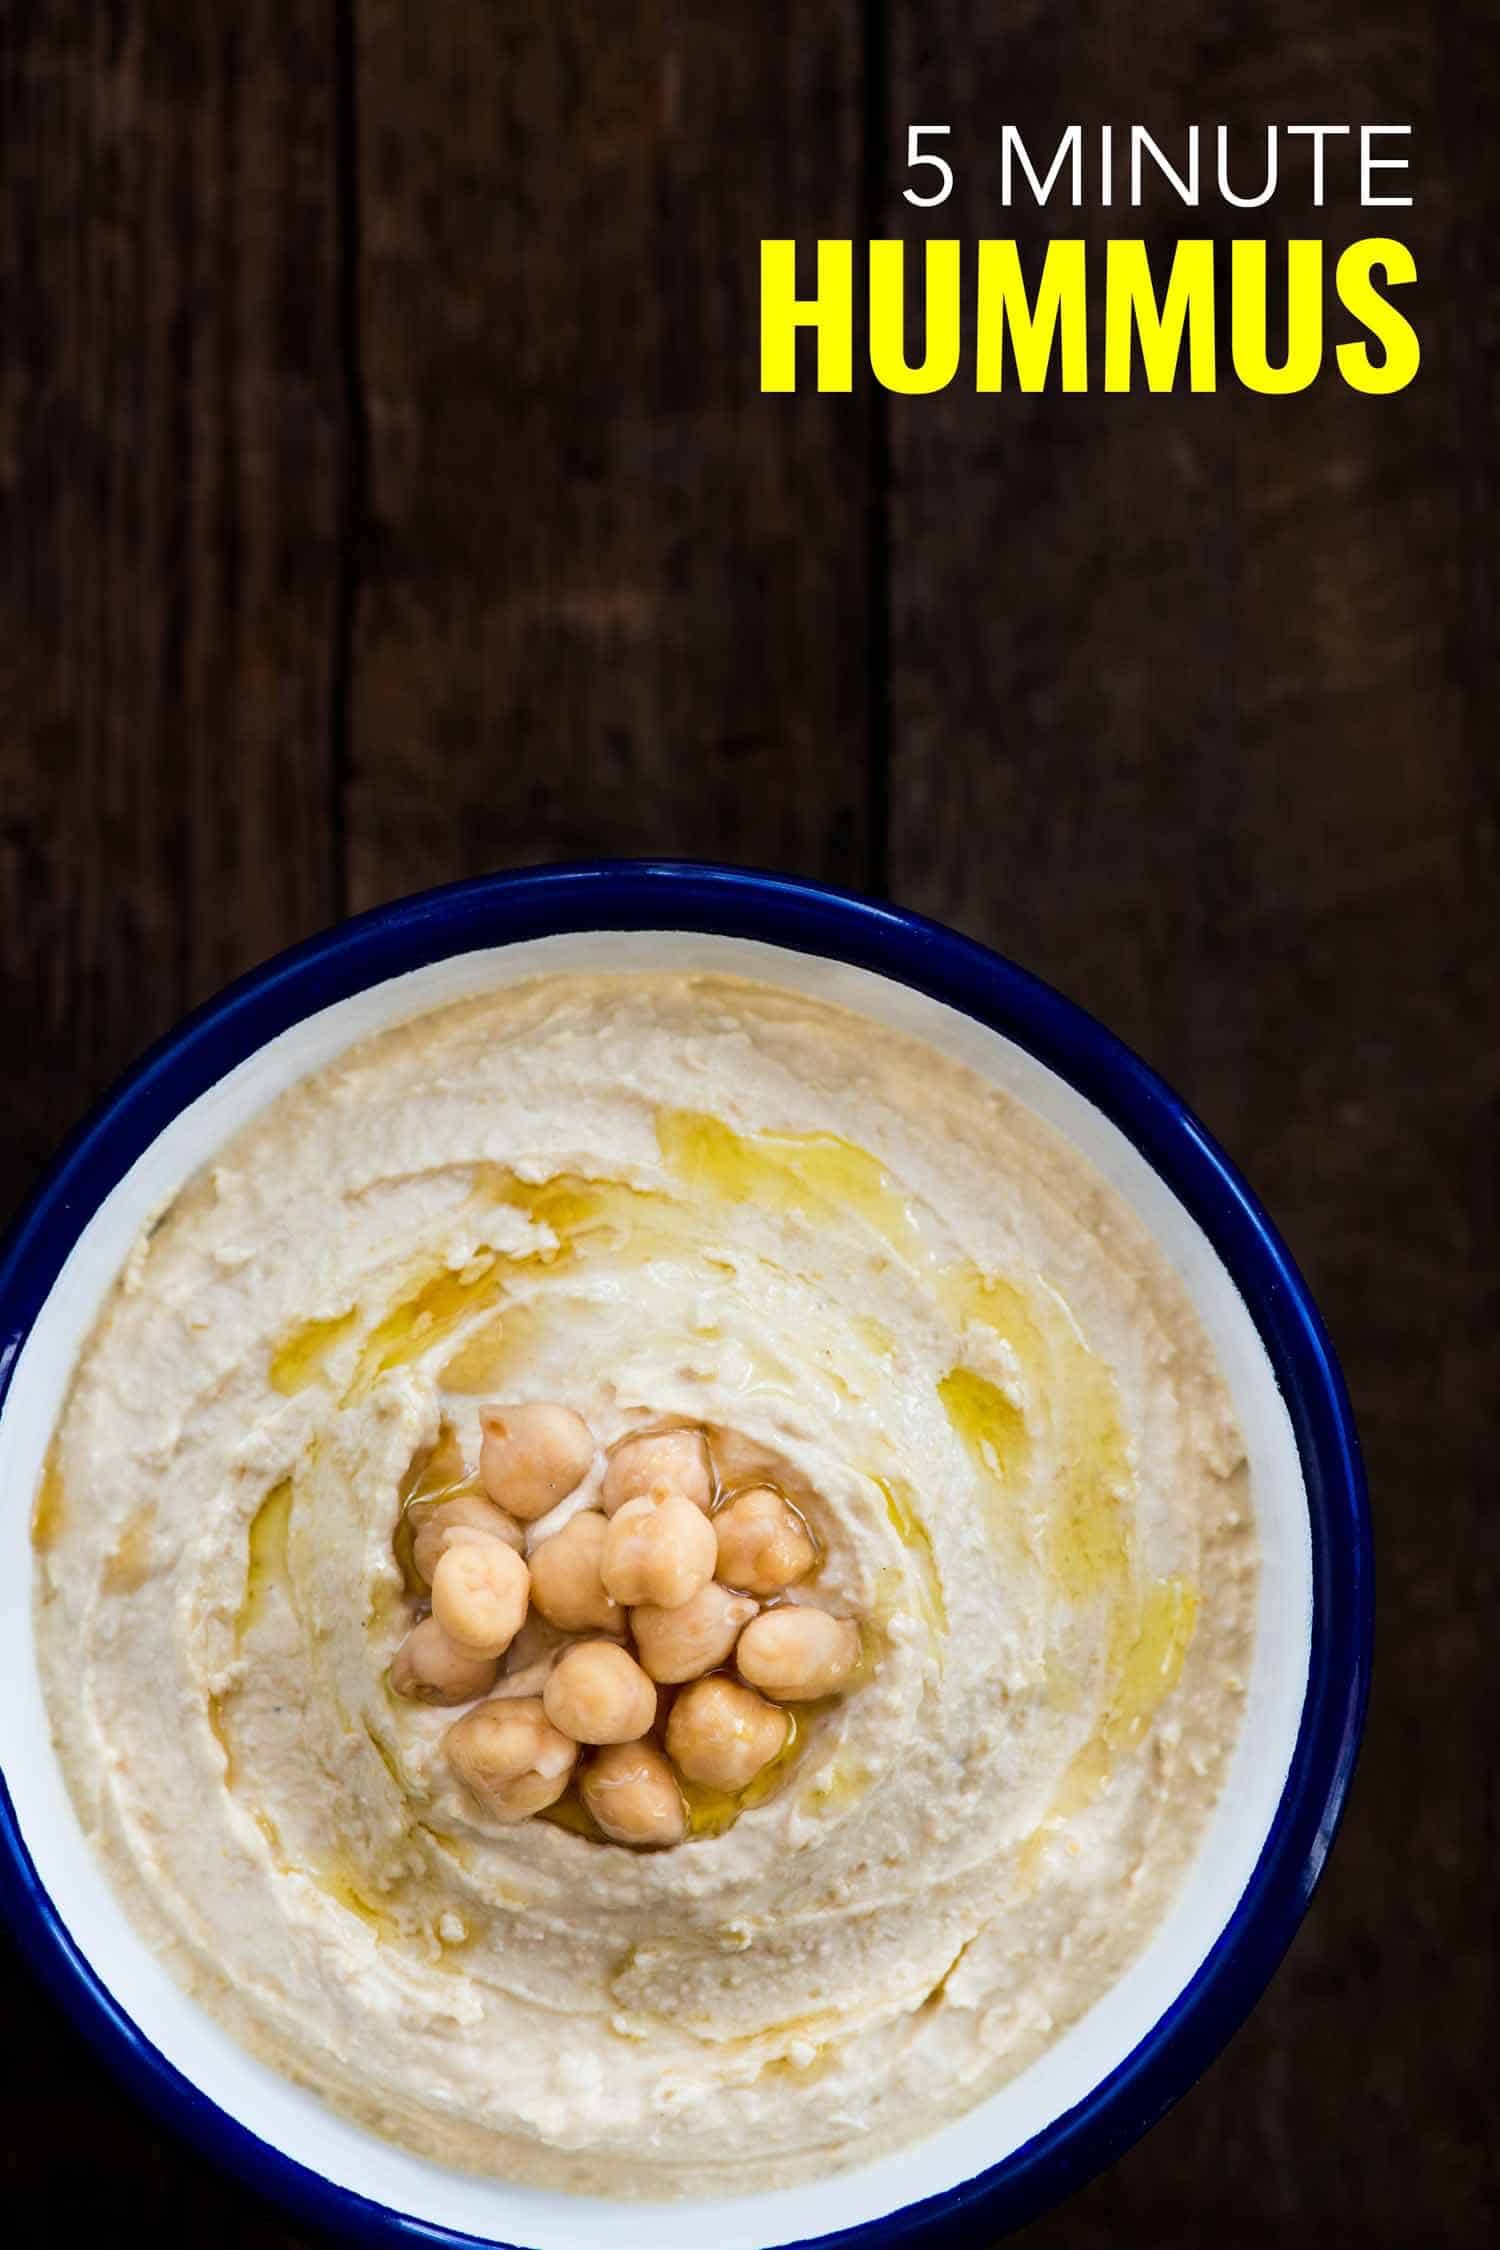 Sprouted Chickpea Hummus with Pine Needle